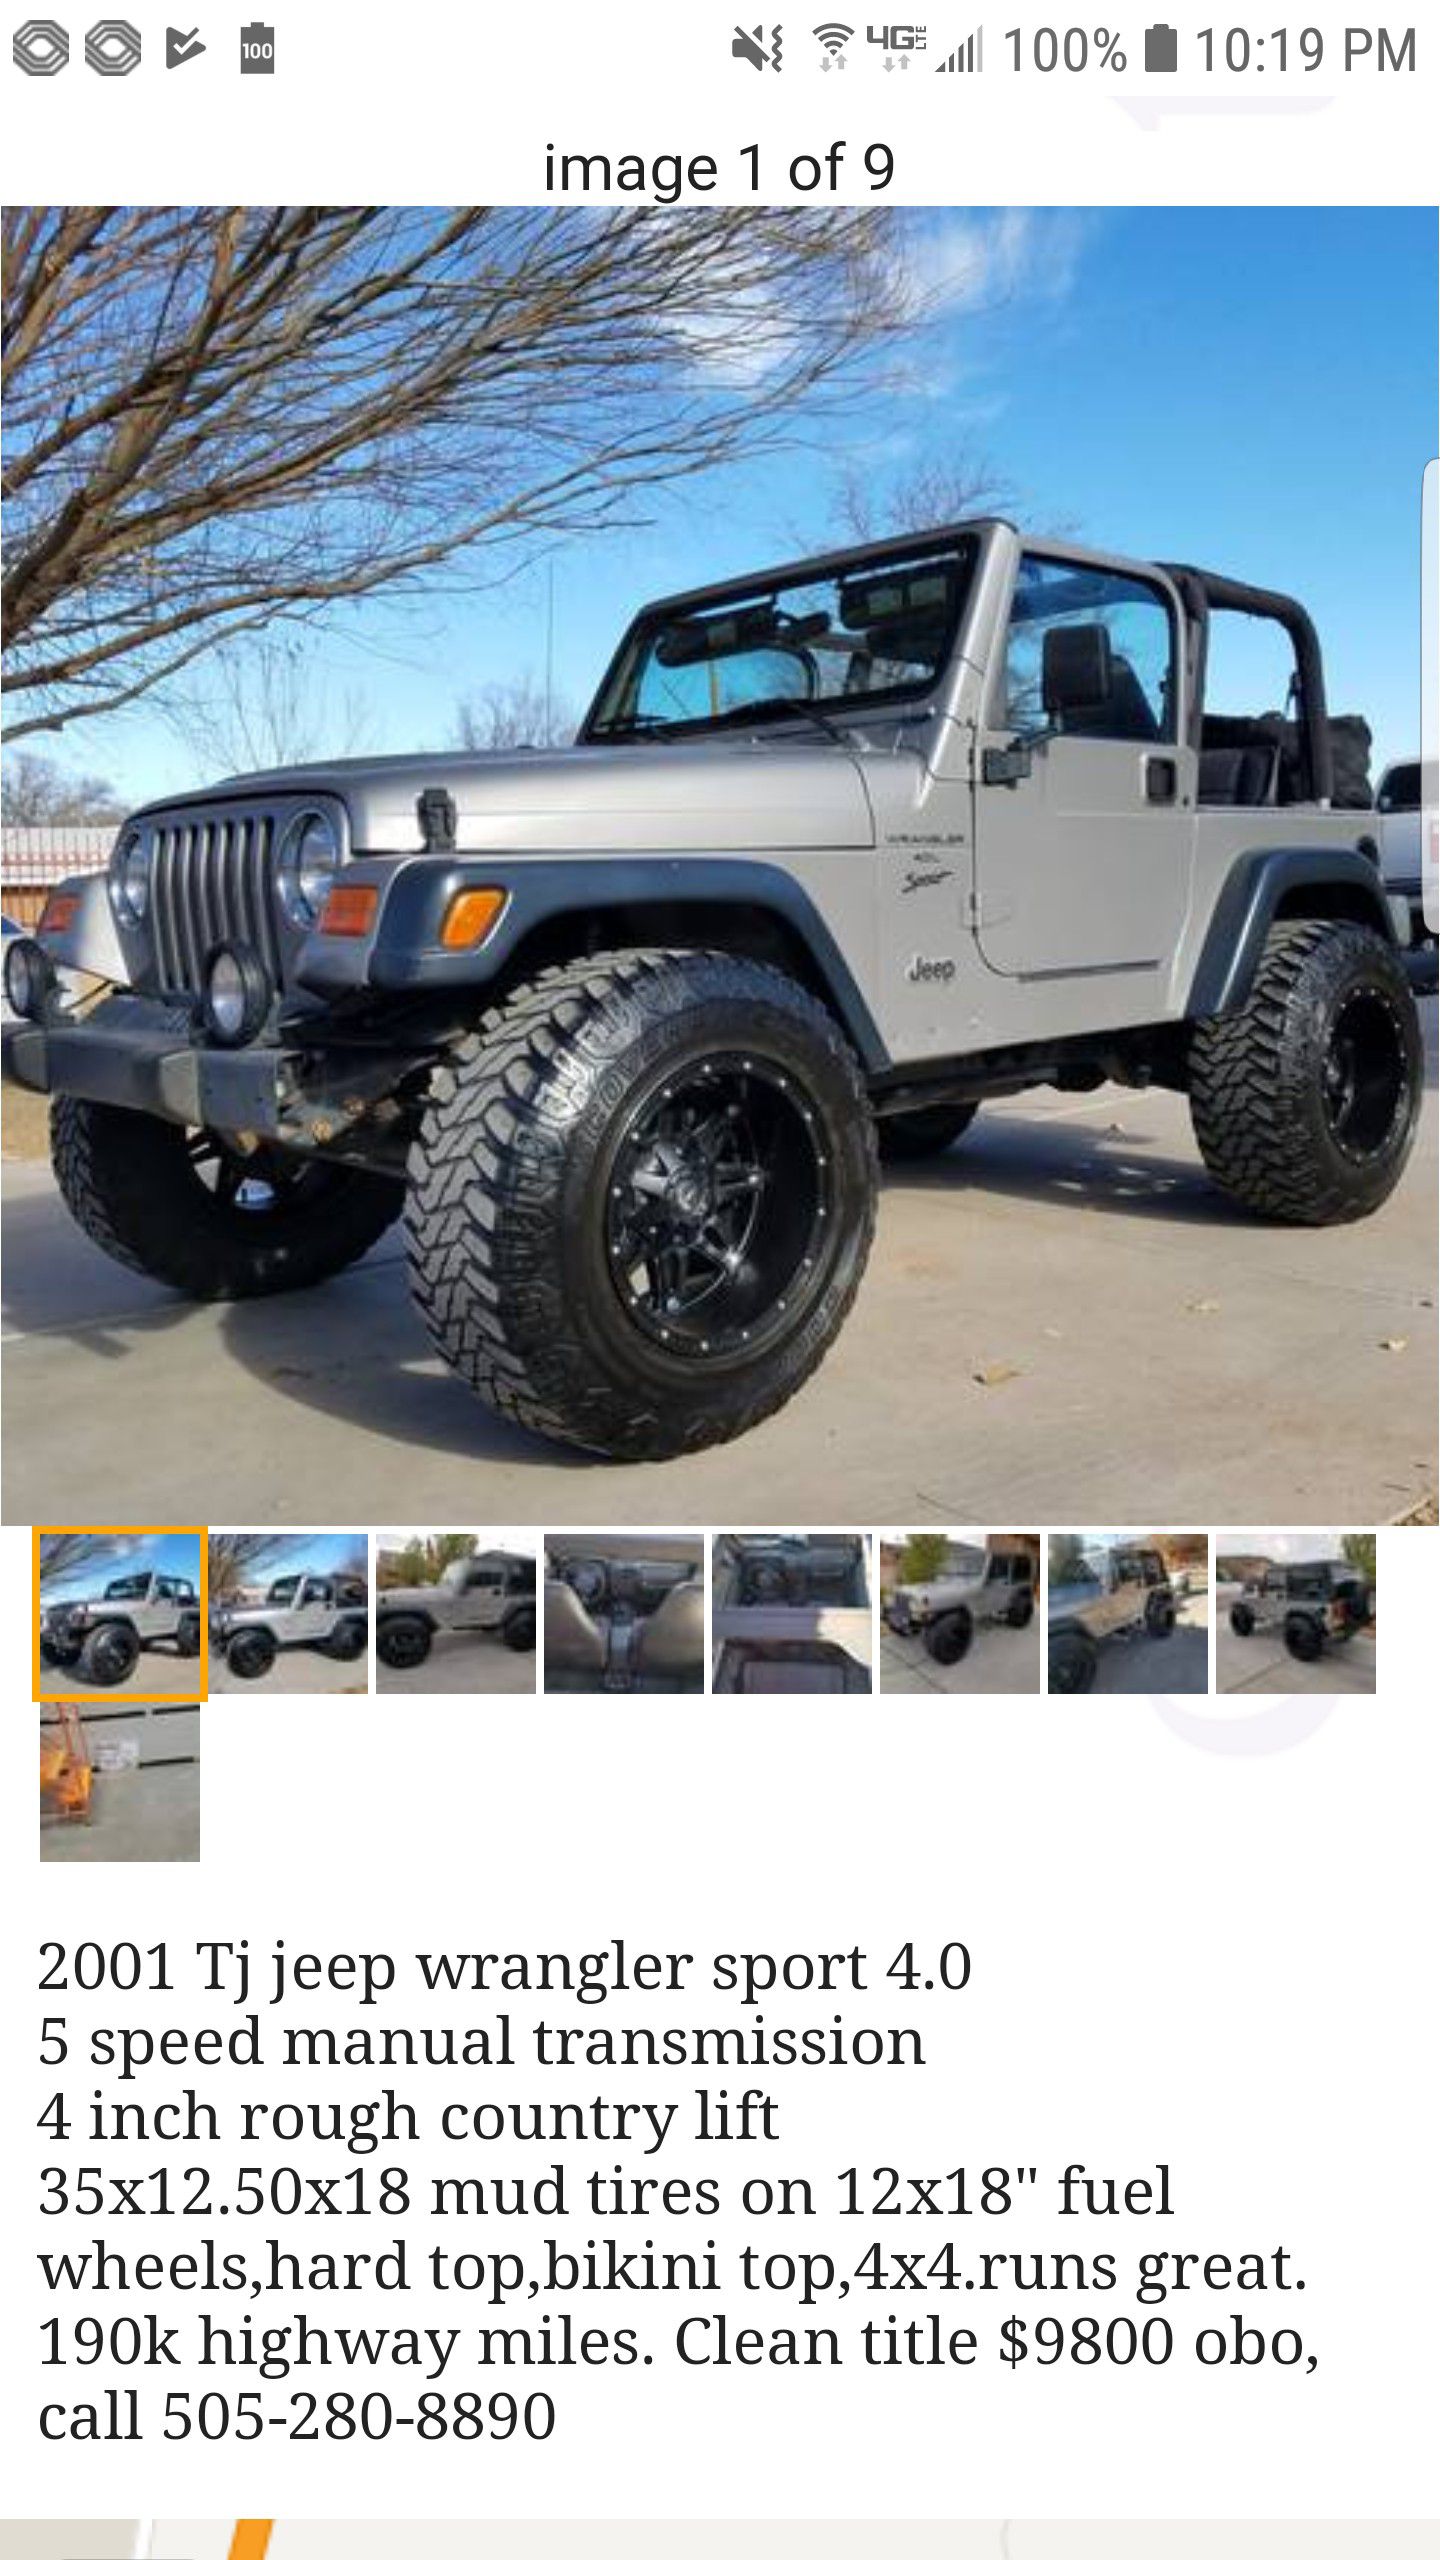 2001 Jeep Wrangler for Sale in Albuquerque, NM - OfferUp